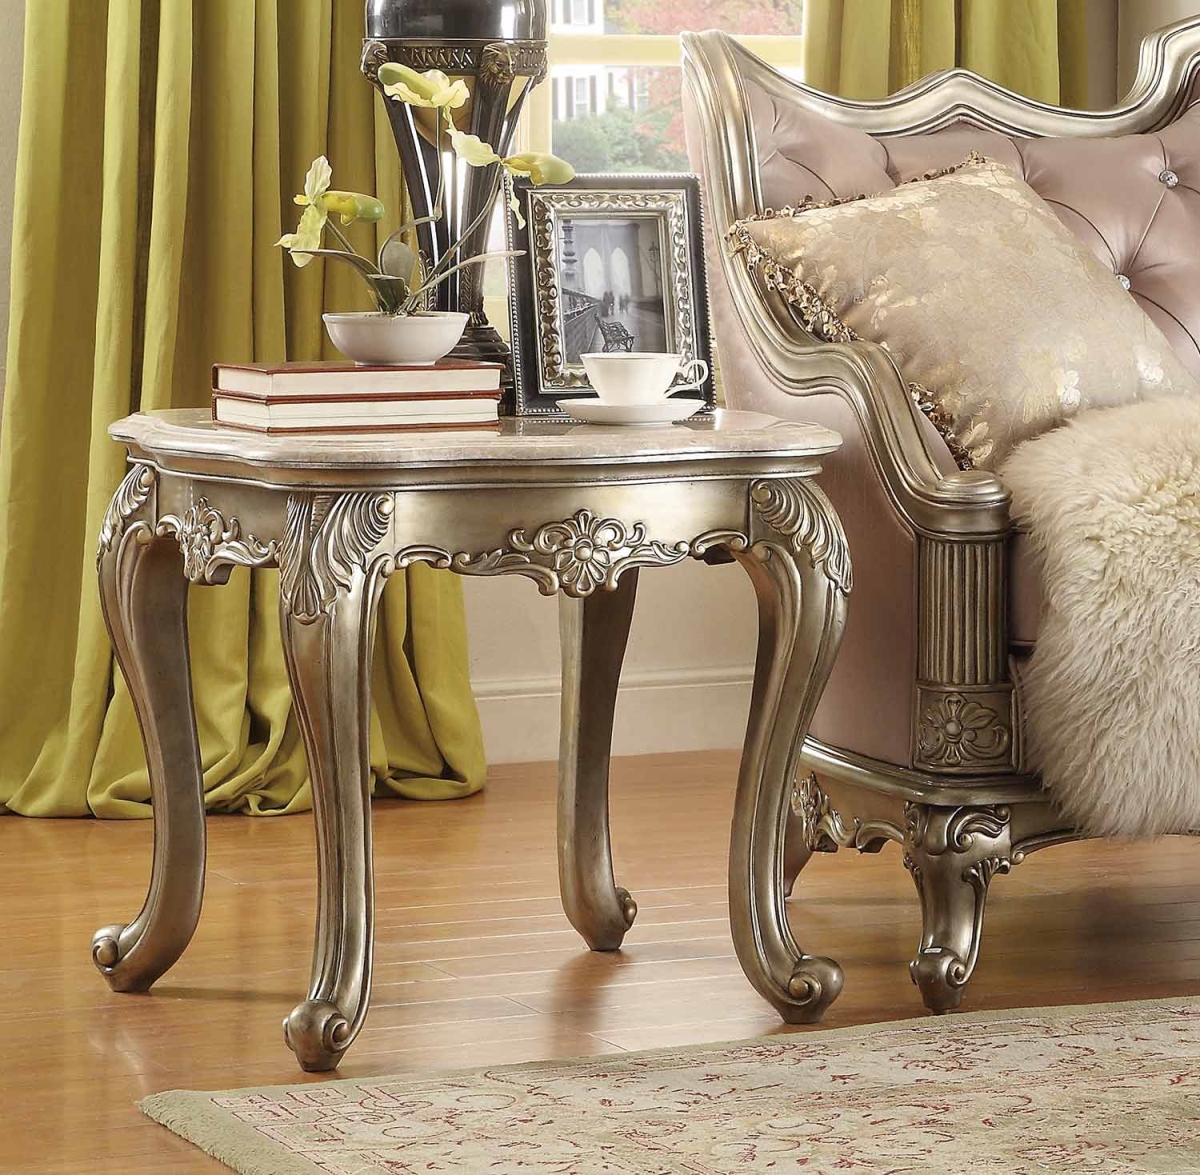 Picture of Home Elegance 8412-04 24 x 26 x 28 in. Fiorella End Table with Marble Top - Delicate Gray